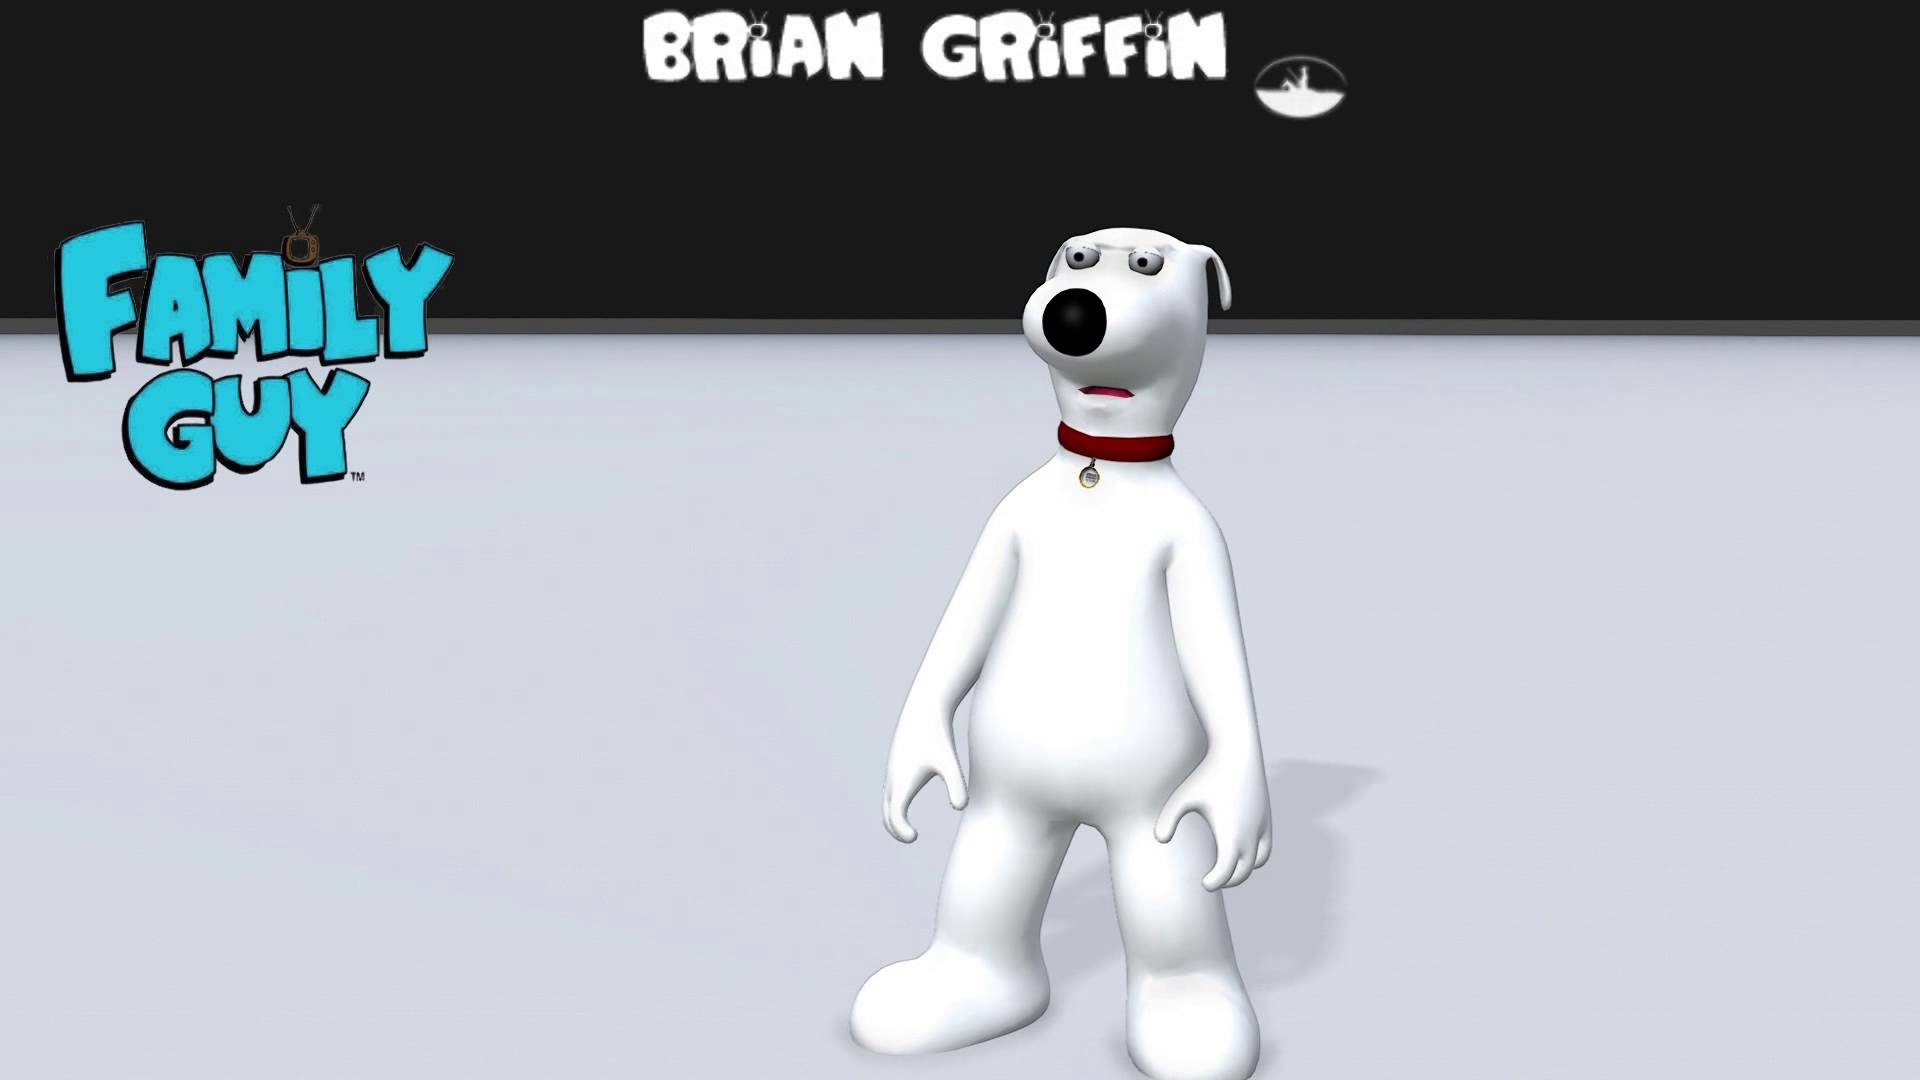 1920x1080 Family Guy Brian Griffin in 3D - Voiced by Seth Macfarlane